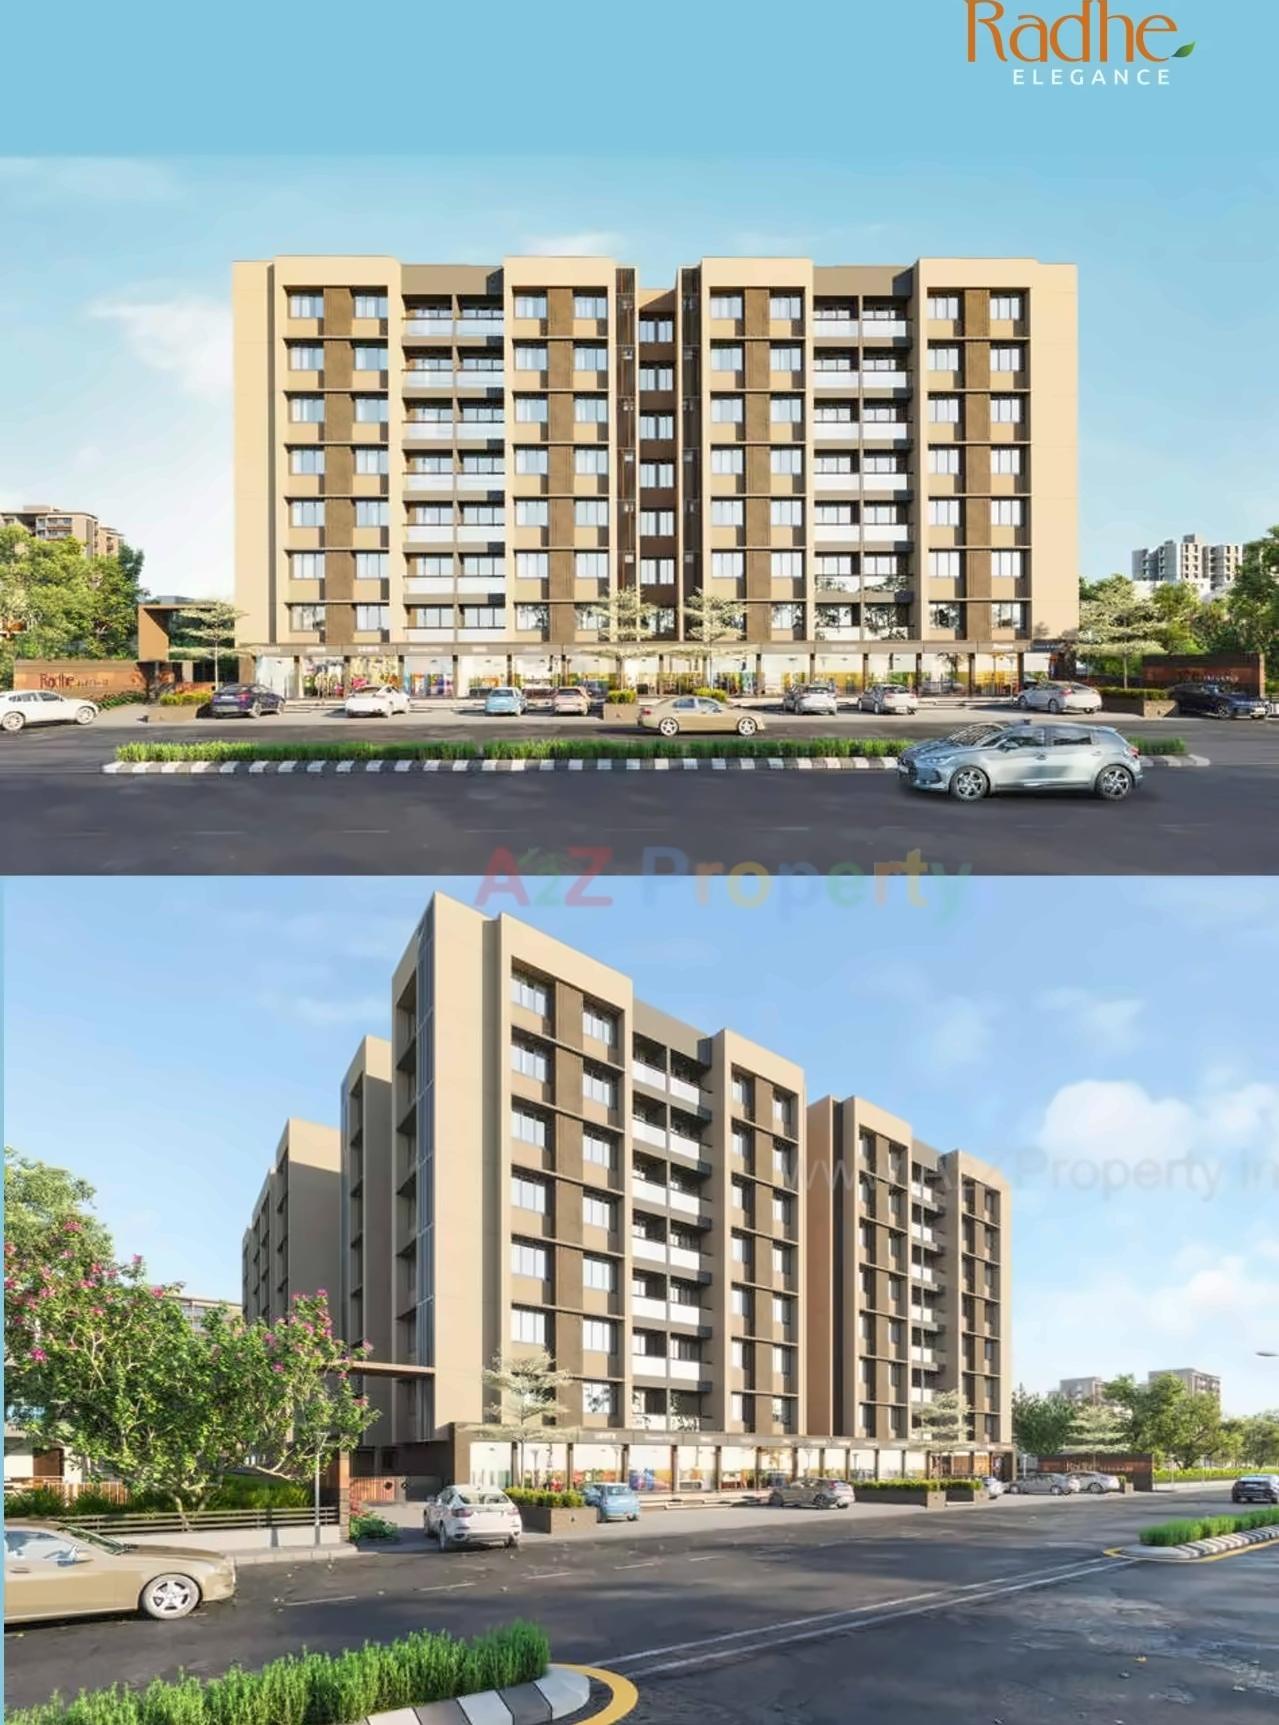 3 BHK Multistorey Apartment / Flat for sale in Aman India Colony Hathijan  Circle Ahmedabad - 1665 Sq-ft - 1665 Sq-ft - 5th floor (out of 5) -  53122220 on NanuBhaiProperty.com